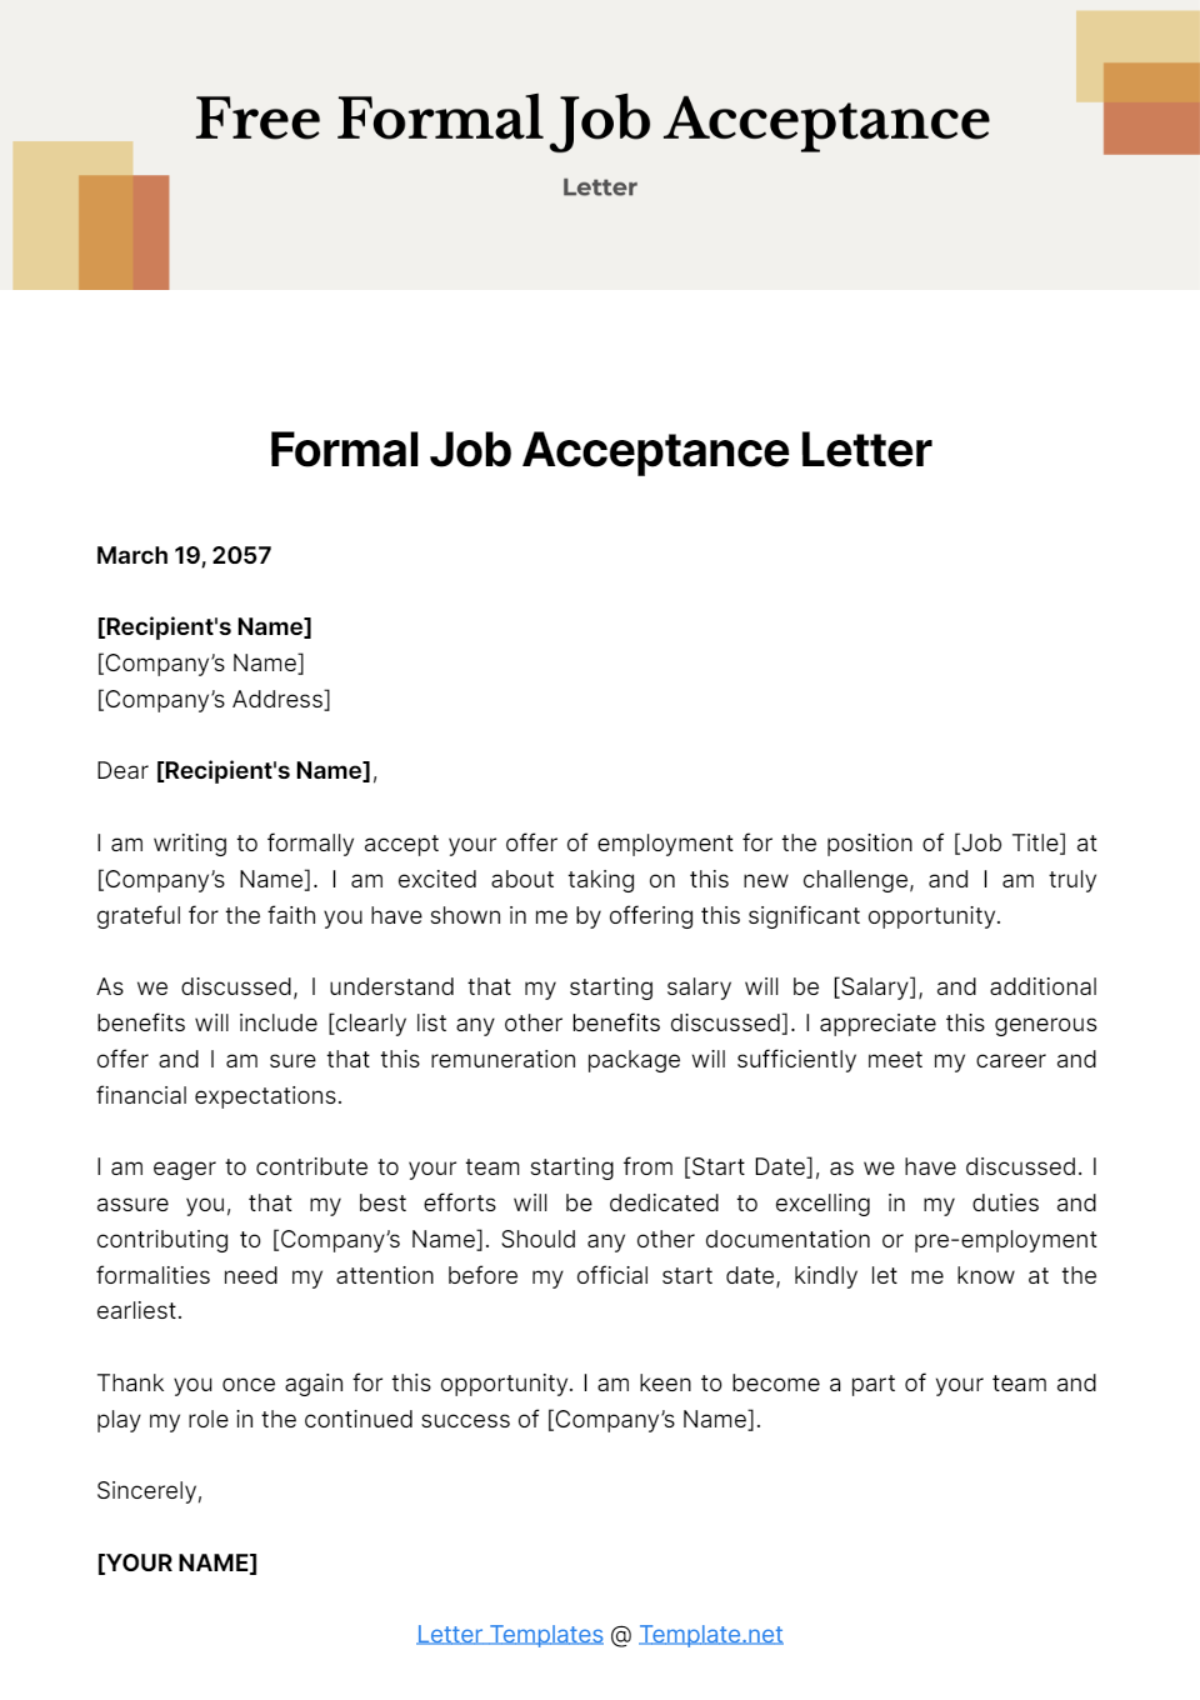 Free Formal Job Acceptance Letter Template